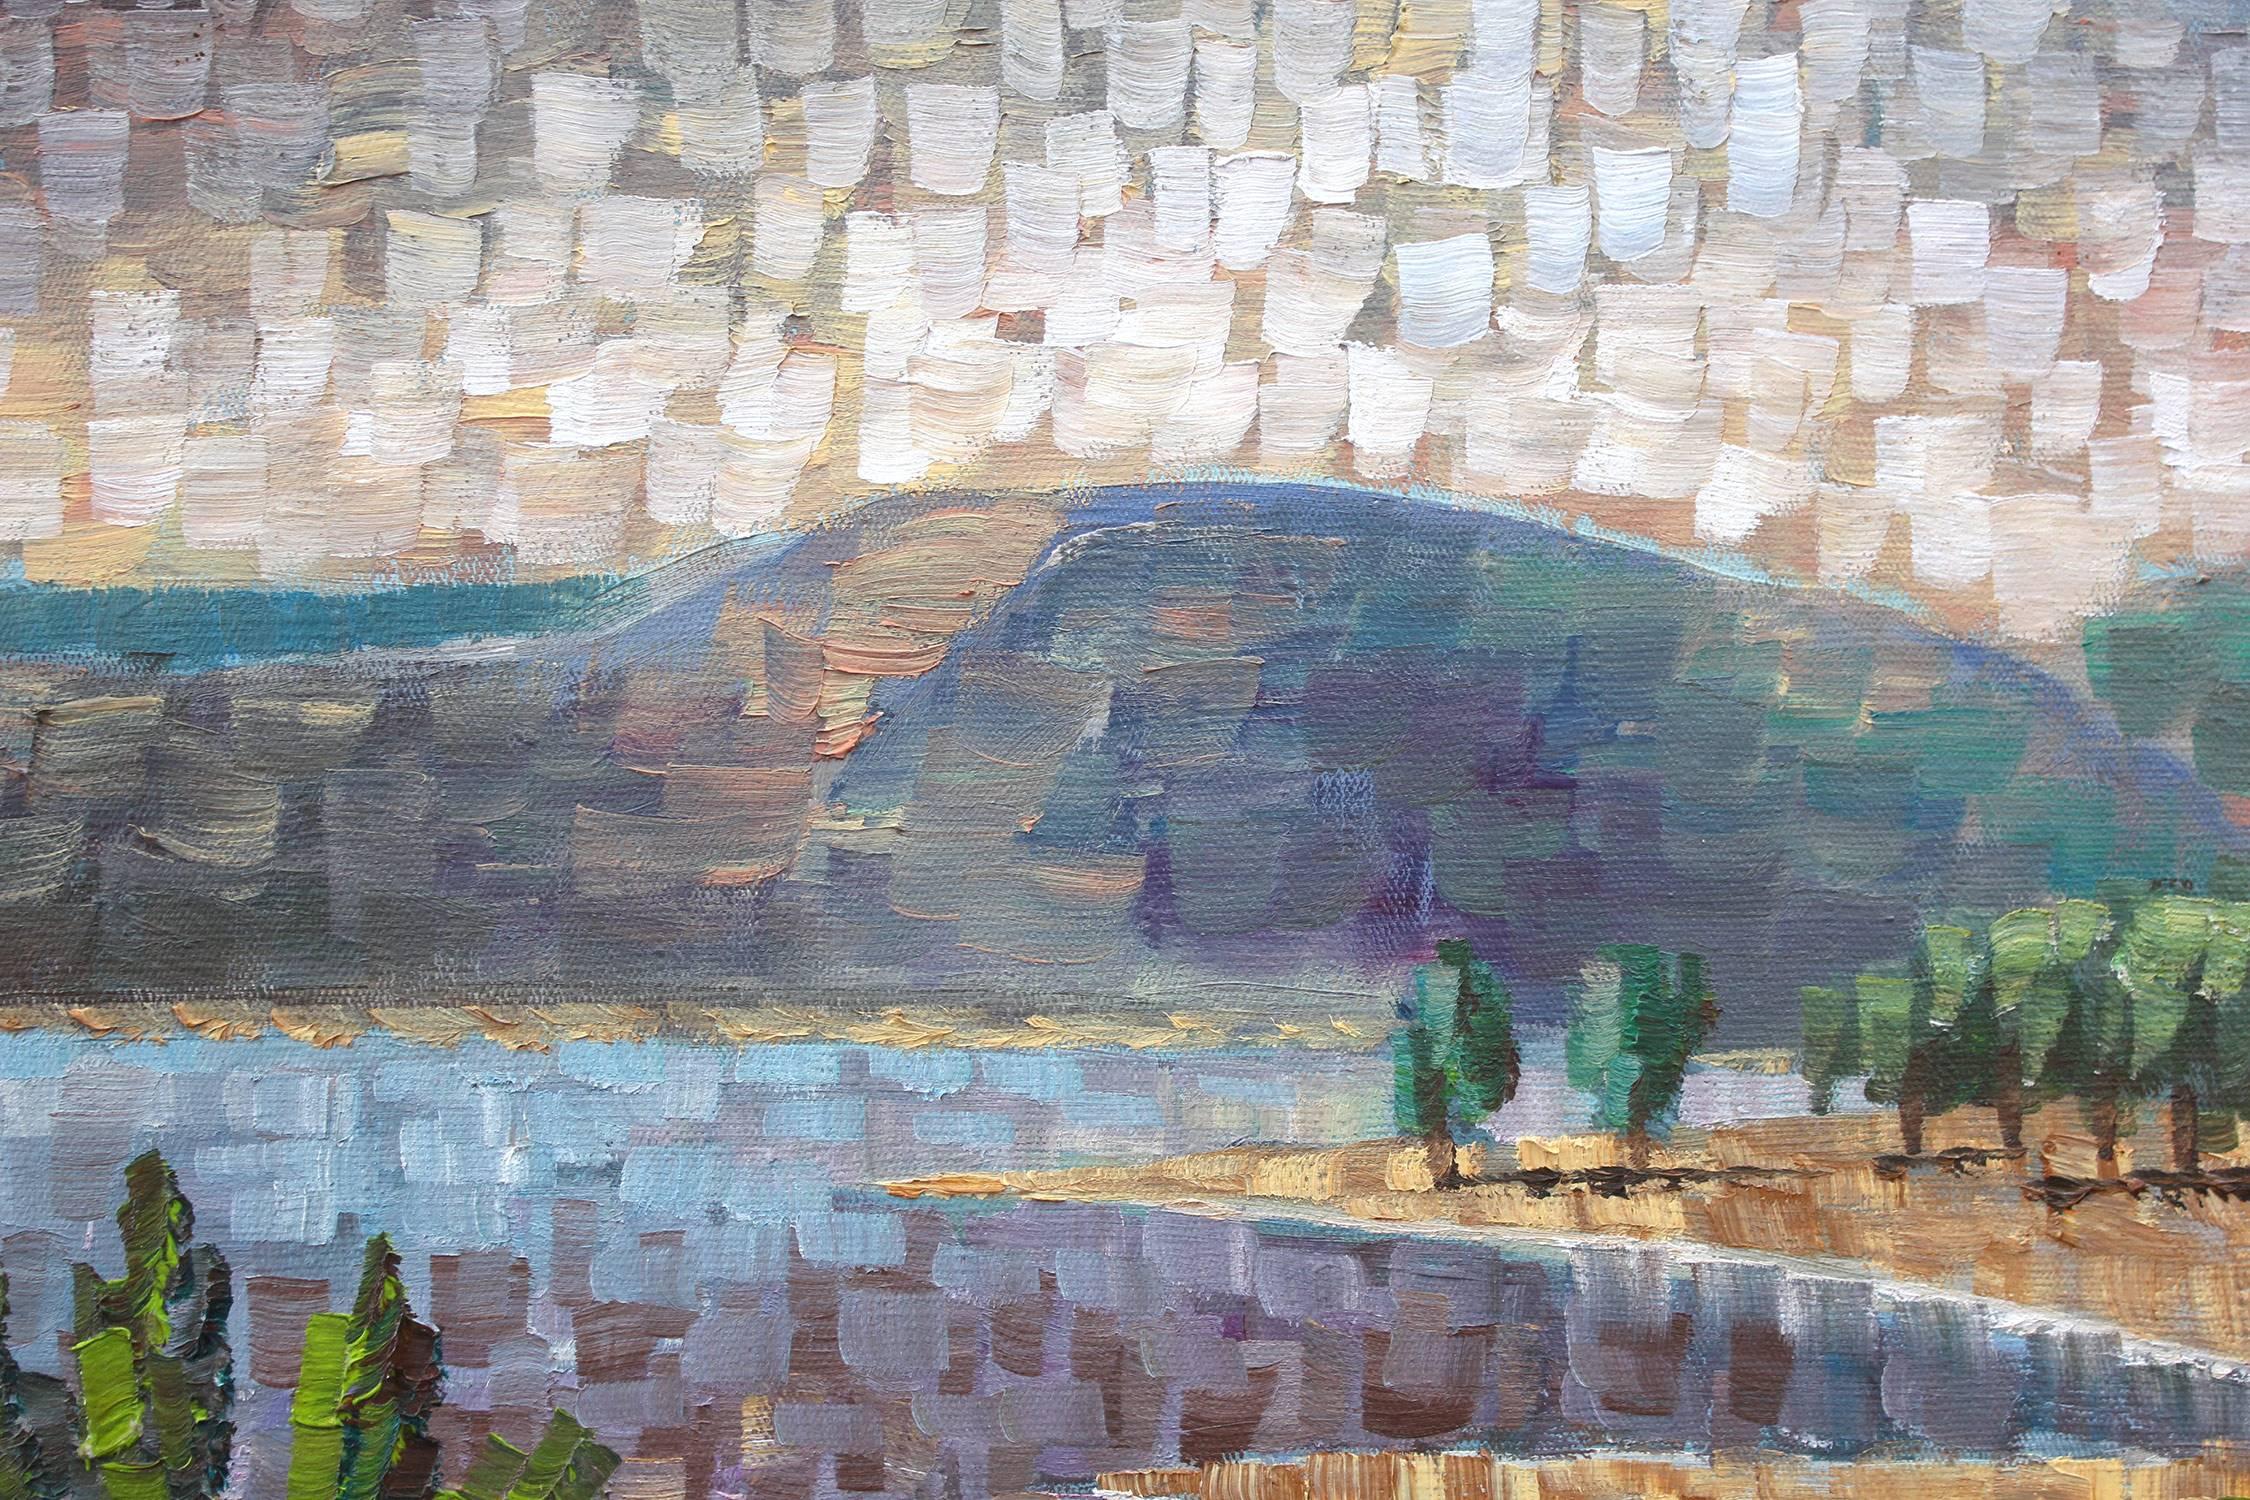 A stunning depiction of a path leading down to the lake with mountains in the background. Nemethy uses a bold impressionistic technique with thick use of paint and wonderful impressions. With joyful colors, this piece is bright and peaceful. Signed